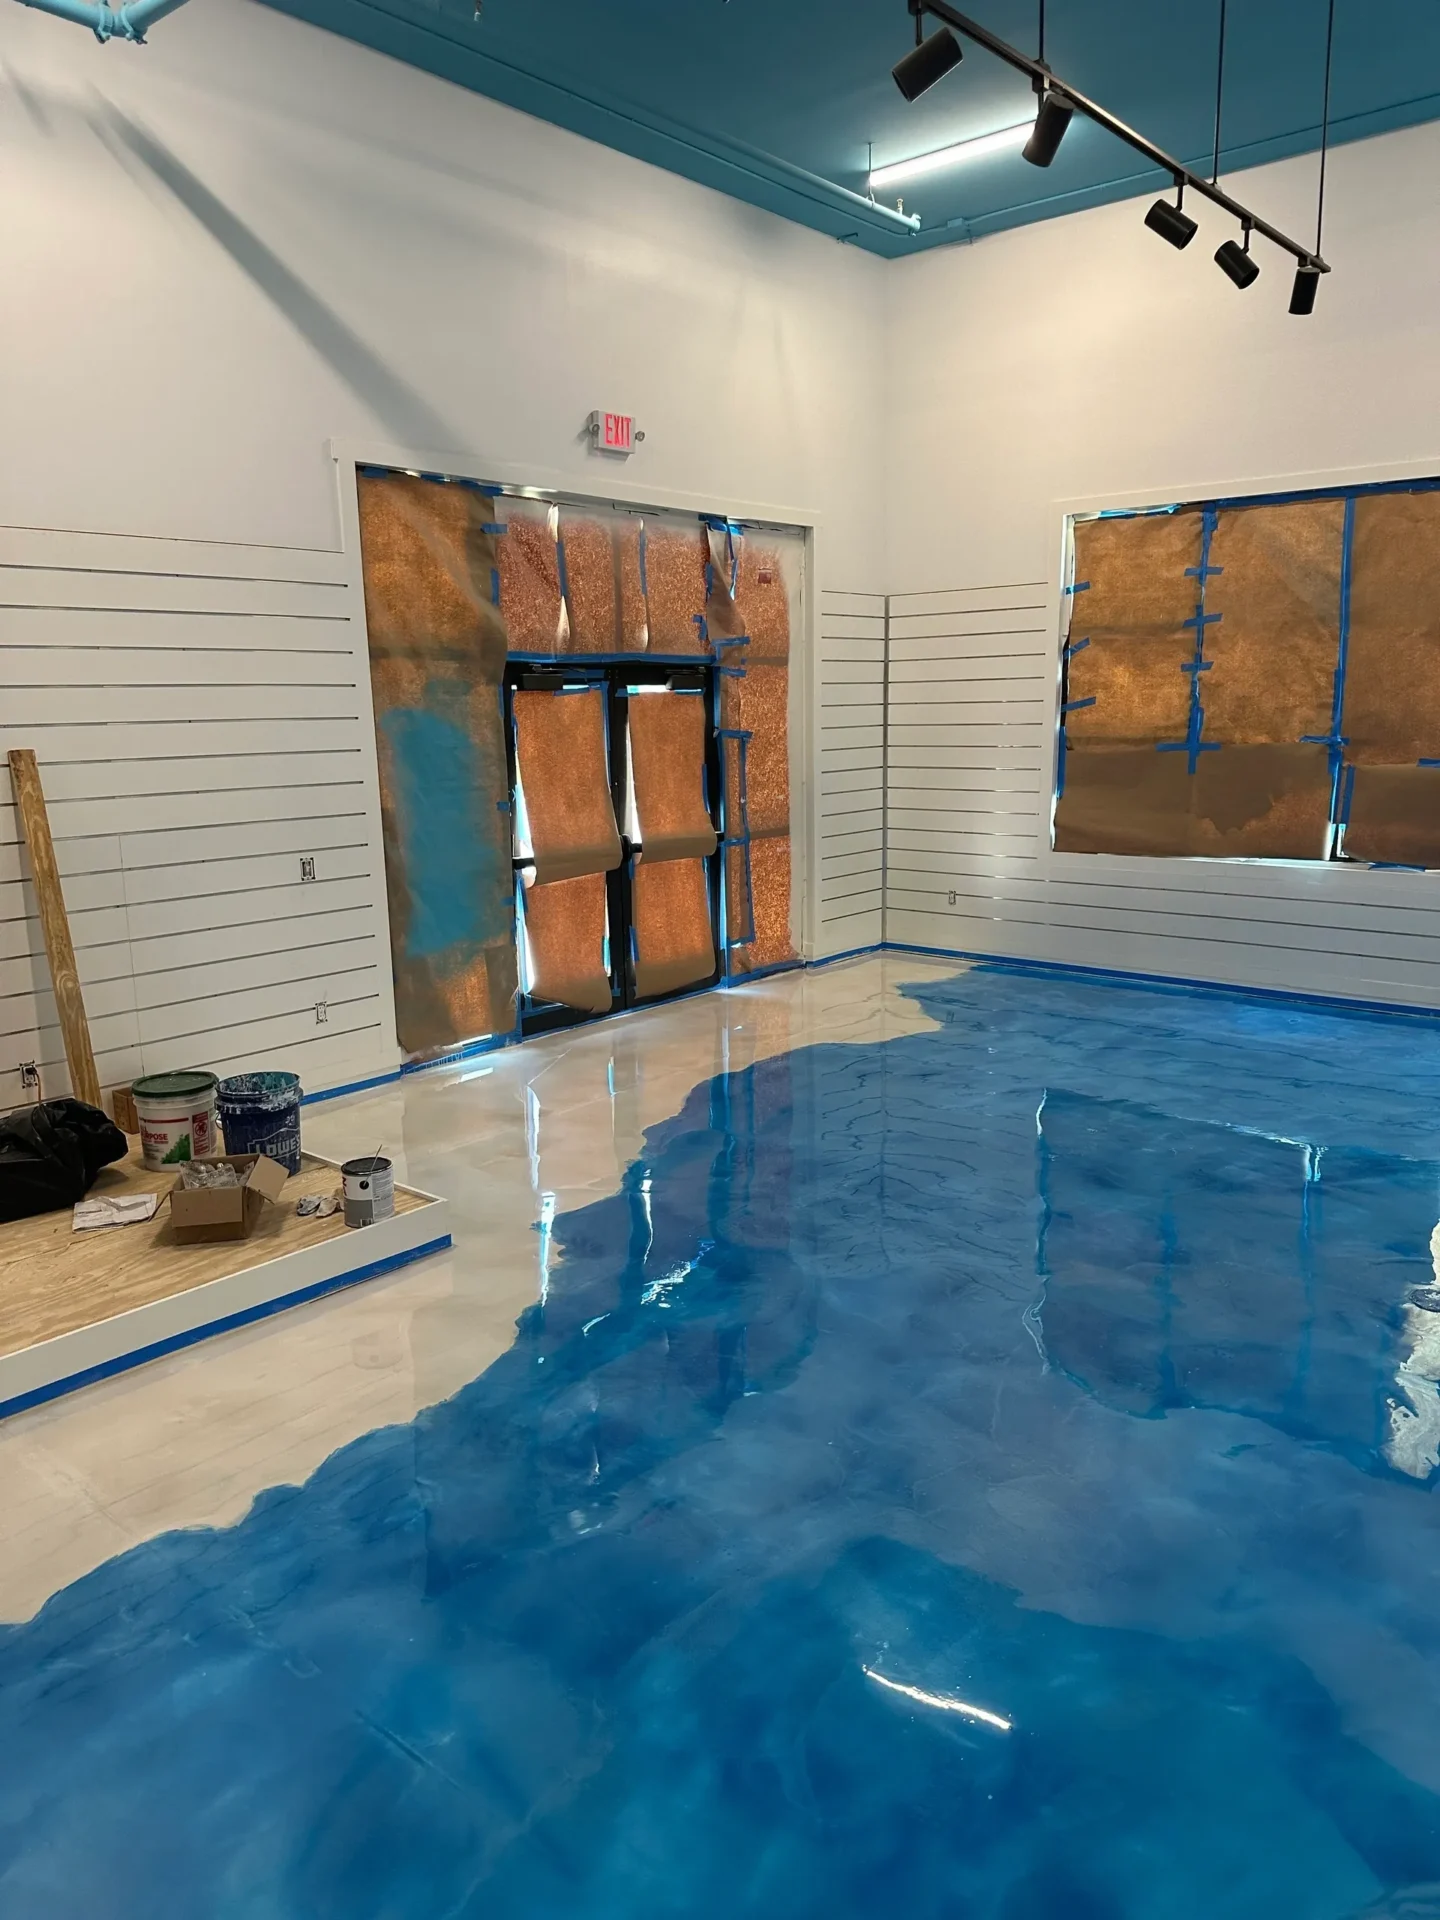 A room with a large pool of water